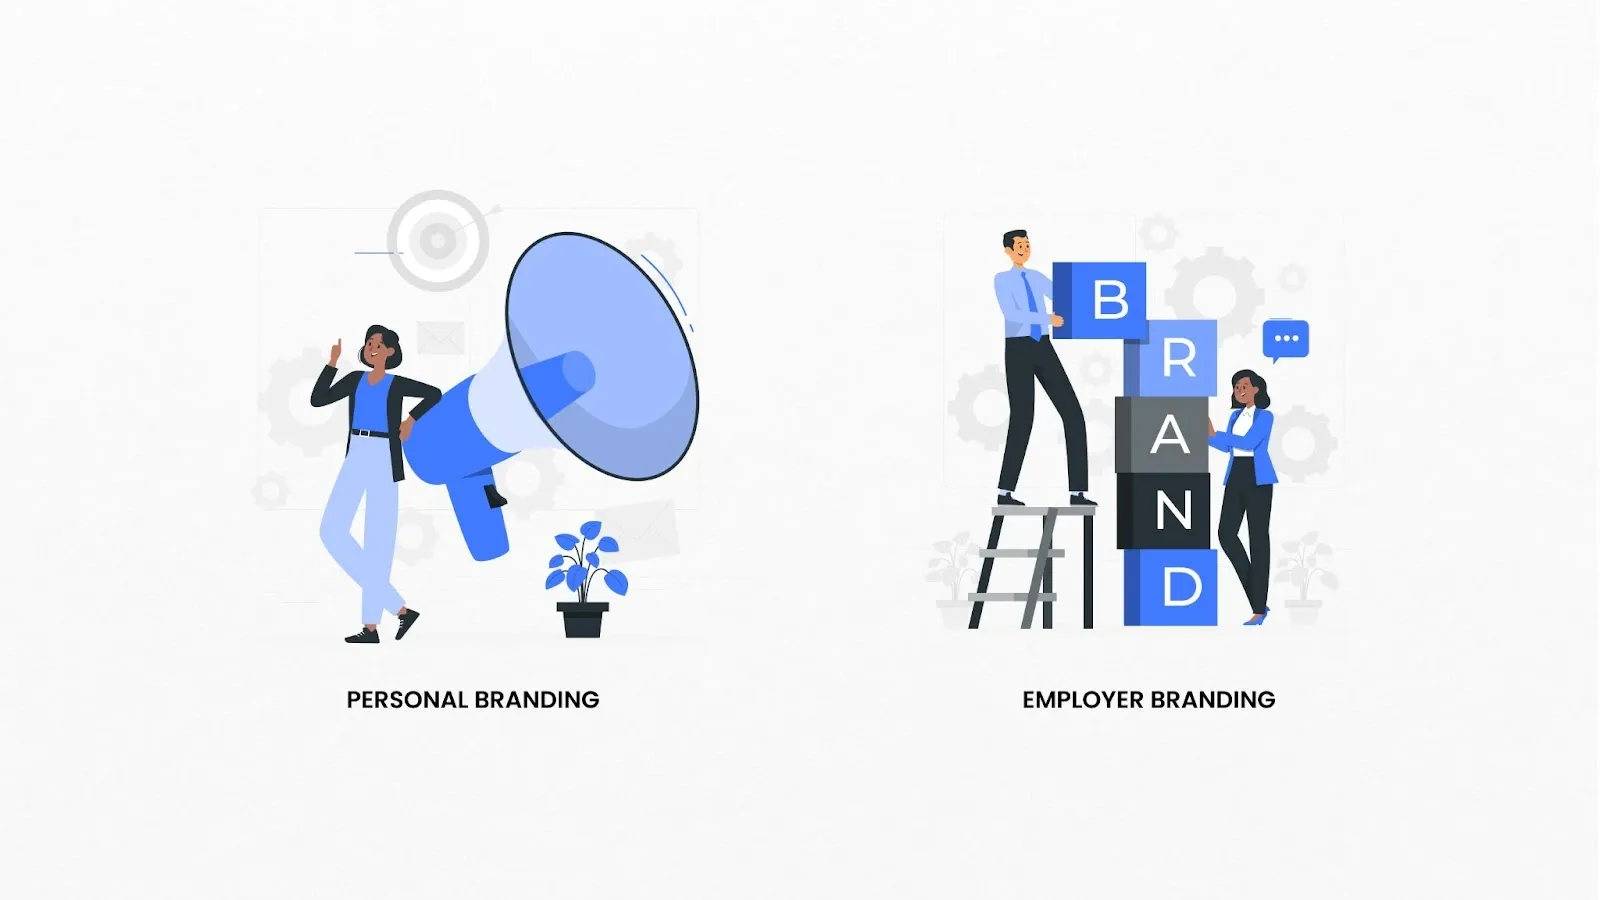 image representing difference between personal branding and employer branding